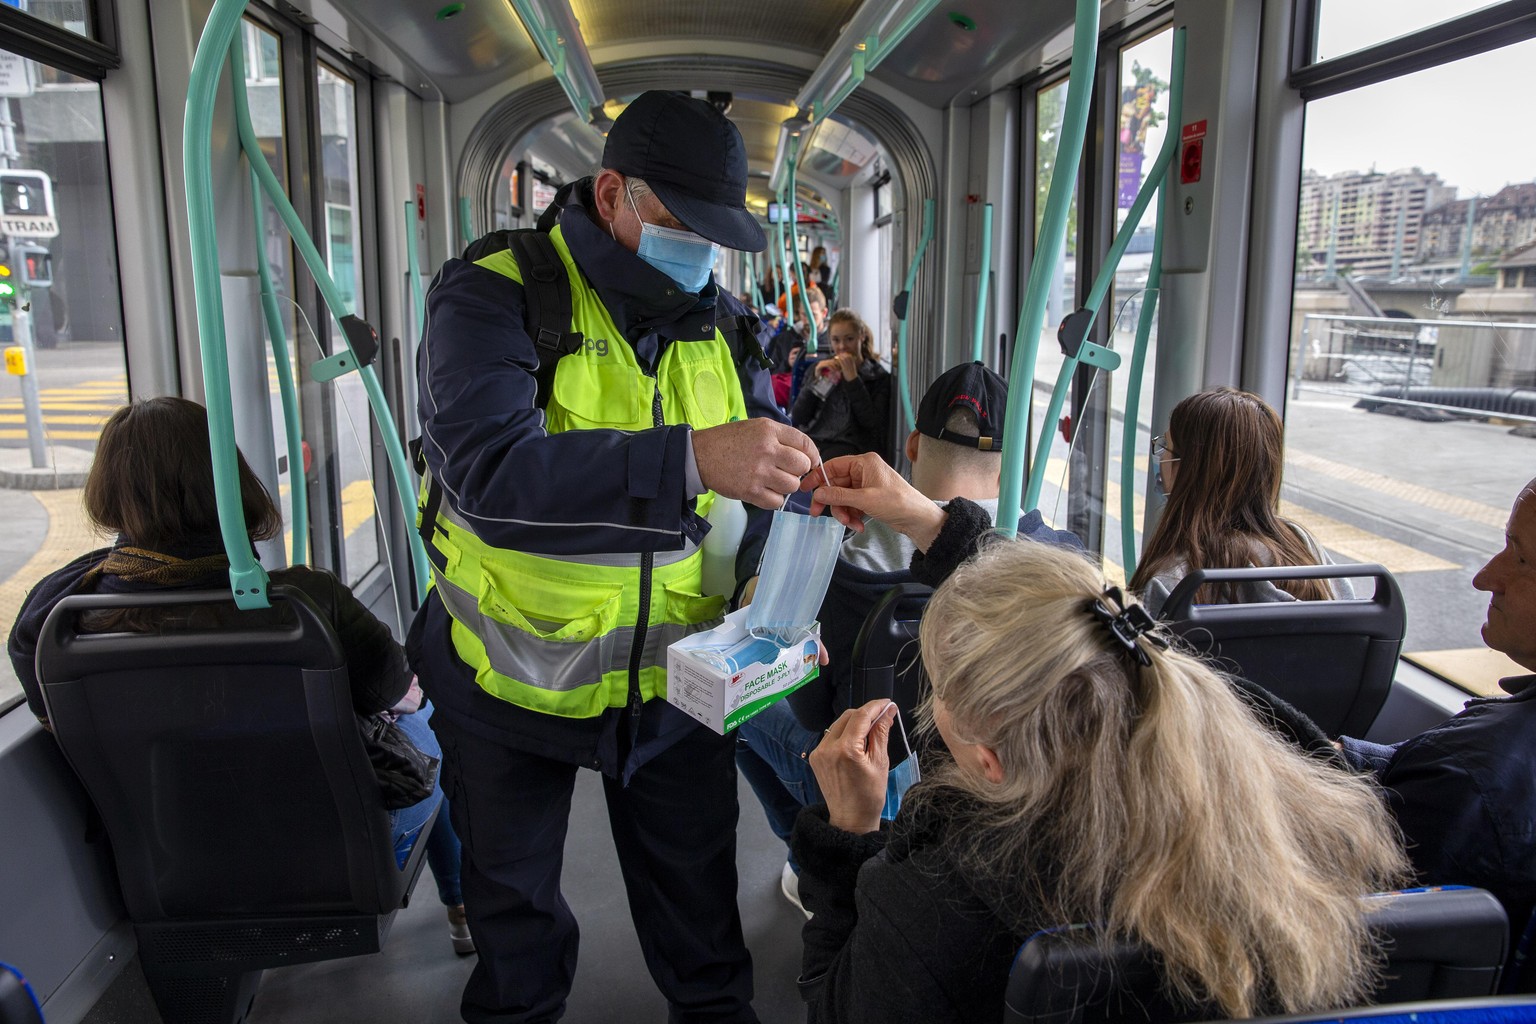 A member staff of the Transports publics genevois, TPG, (English: Geneva Public Transport), distributes protective face masks as a preventive mesure against the spread the coronavirus COVID-19 to pass ...